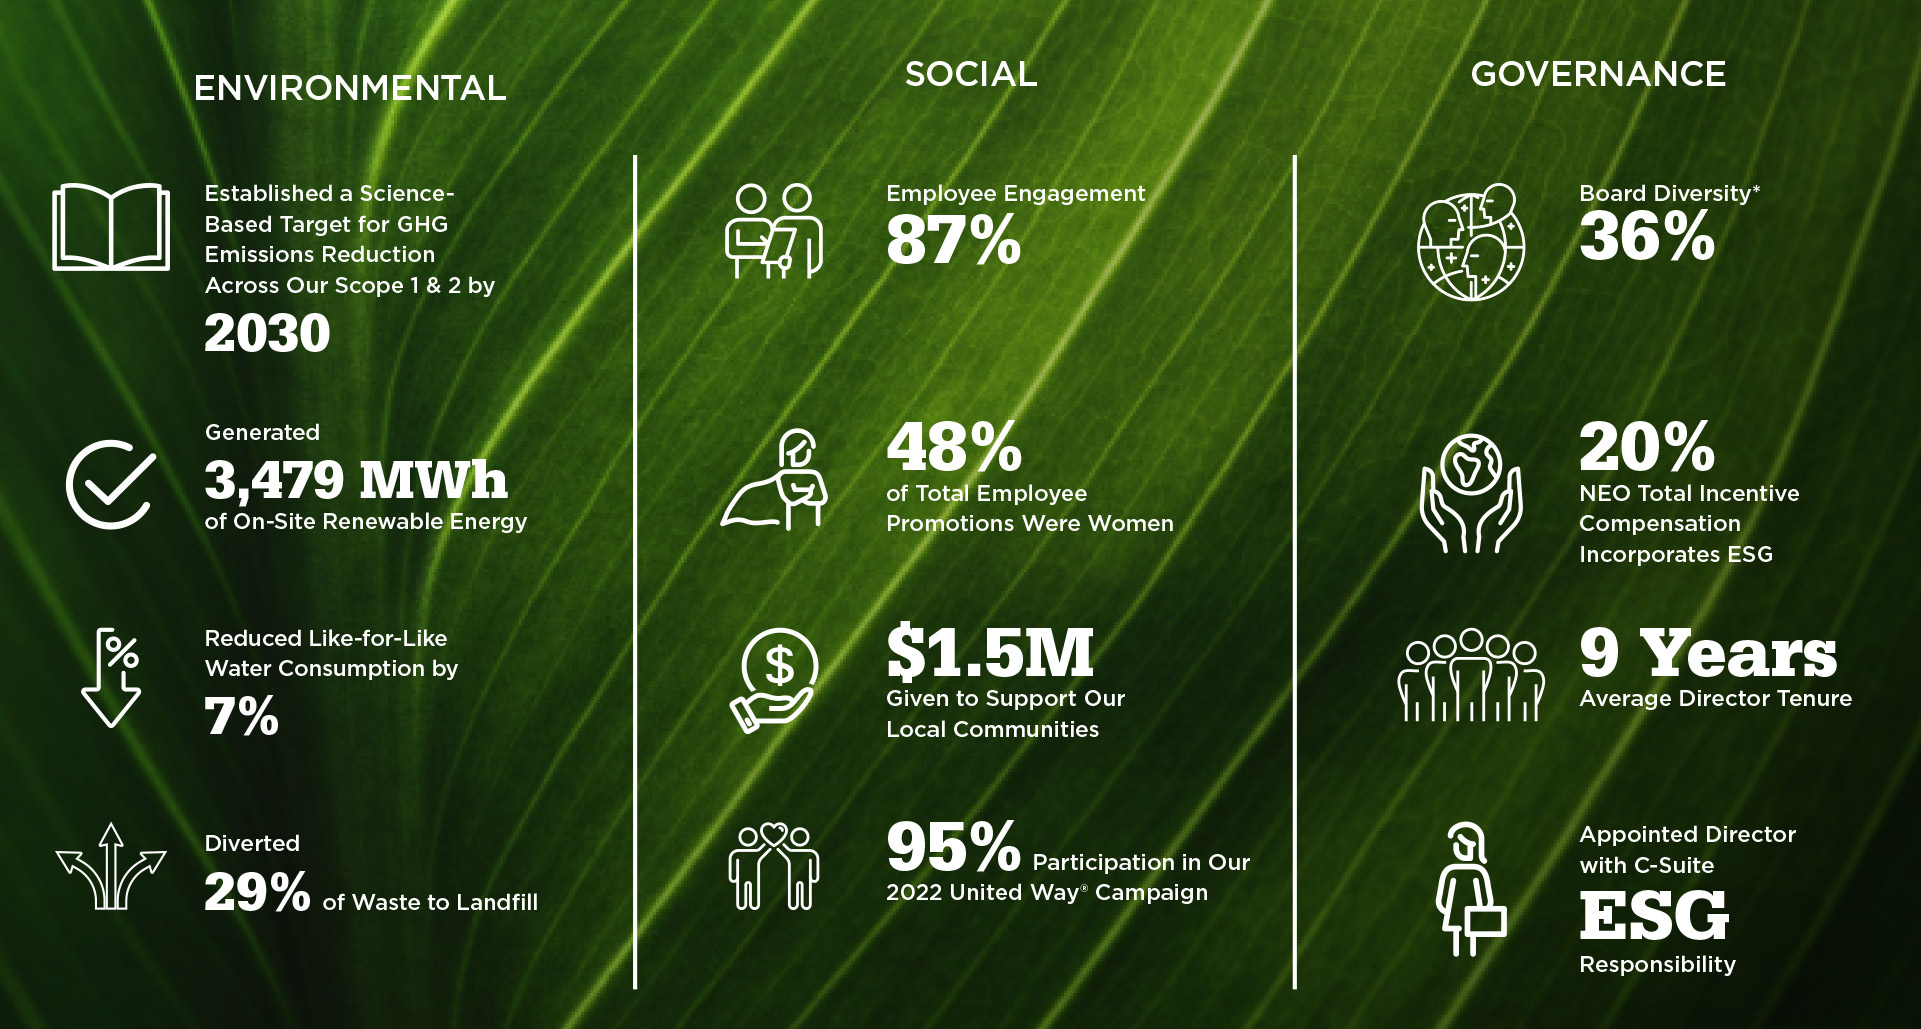 Image of highlights from regency Centers' 2022 Corporate Responsibility Report